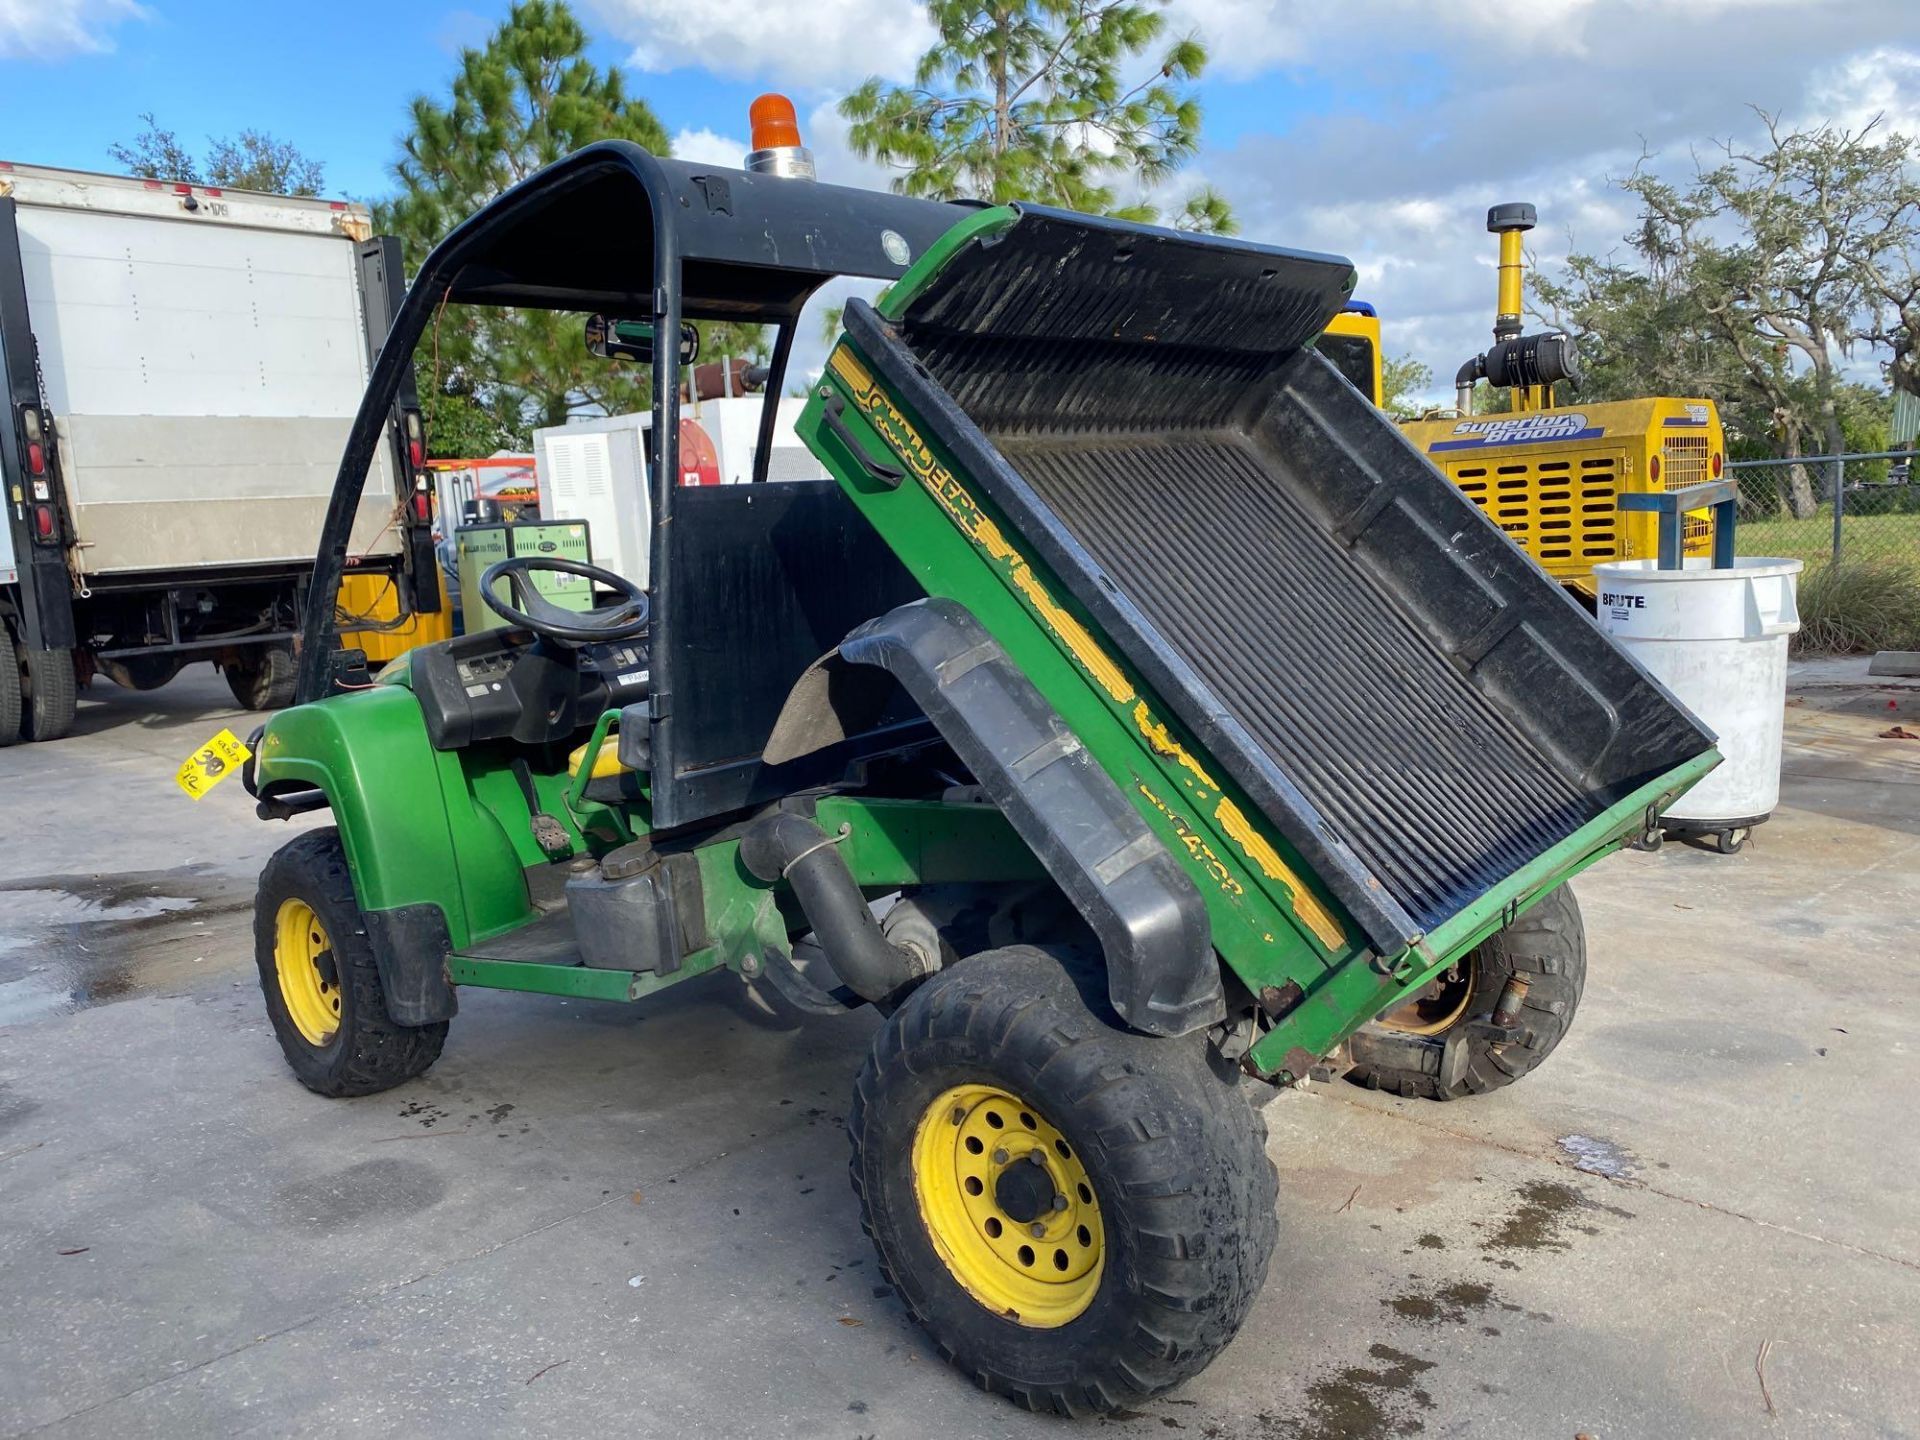 JOHN DEERE GATOR XUV UTILITY CART WITH HYDRAULIC DUMP BED, GAS POWERED, 1,713 HOURS SHOWING 4x4 - Image 4 of 9